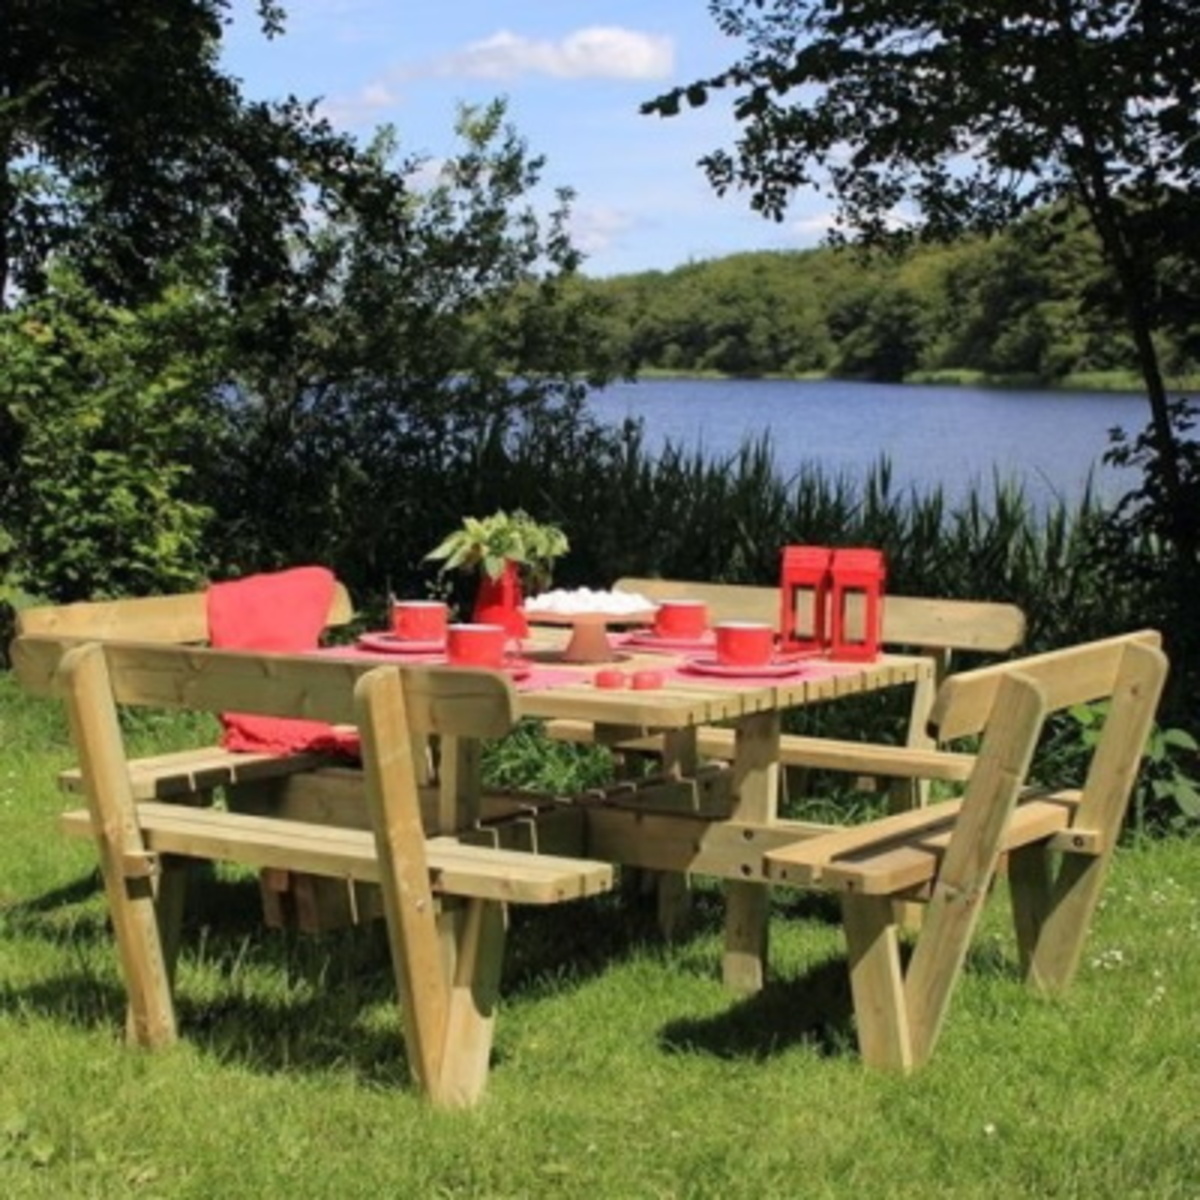 Picnic table wood with backrest